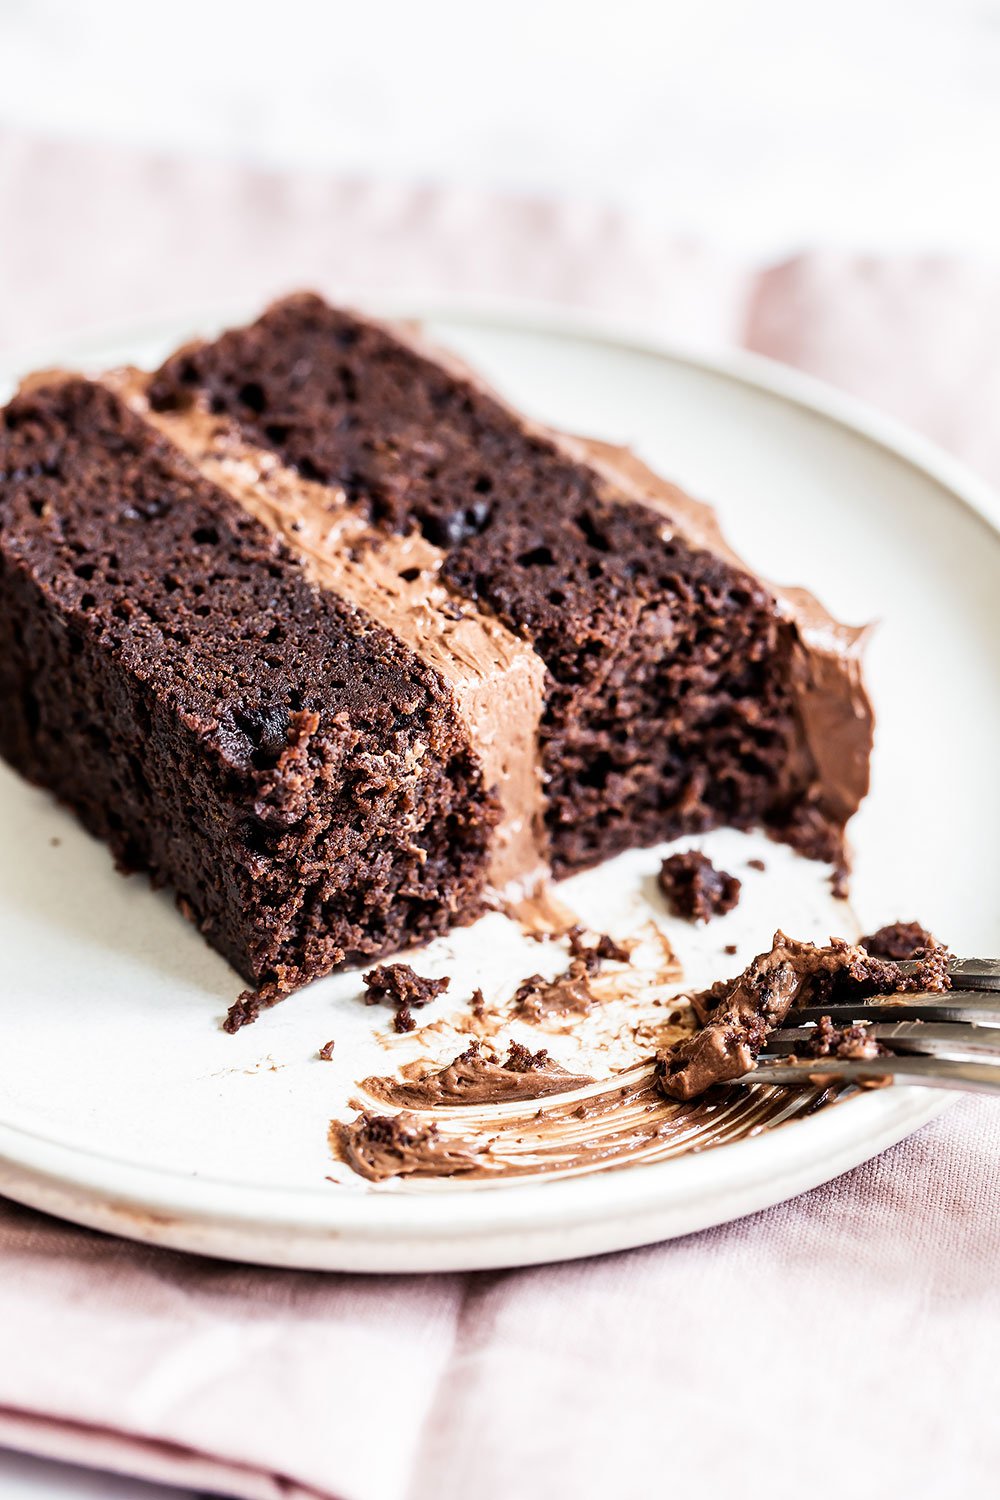 a slice of fudgy chocolate cake on a plate with a fork, ready to serve